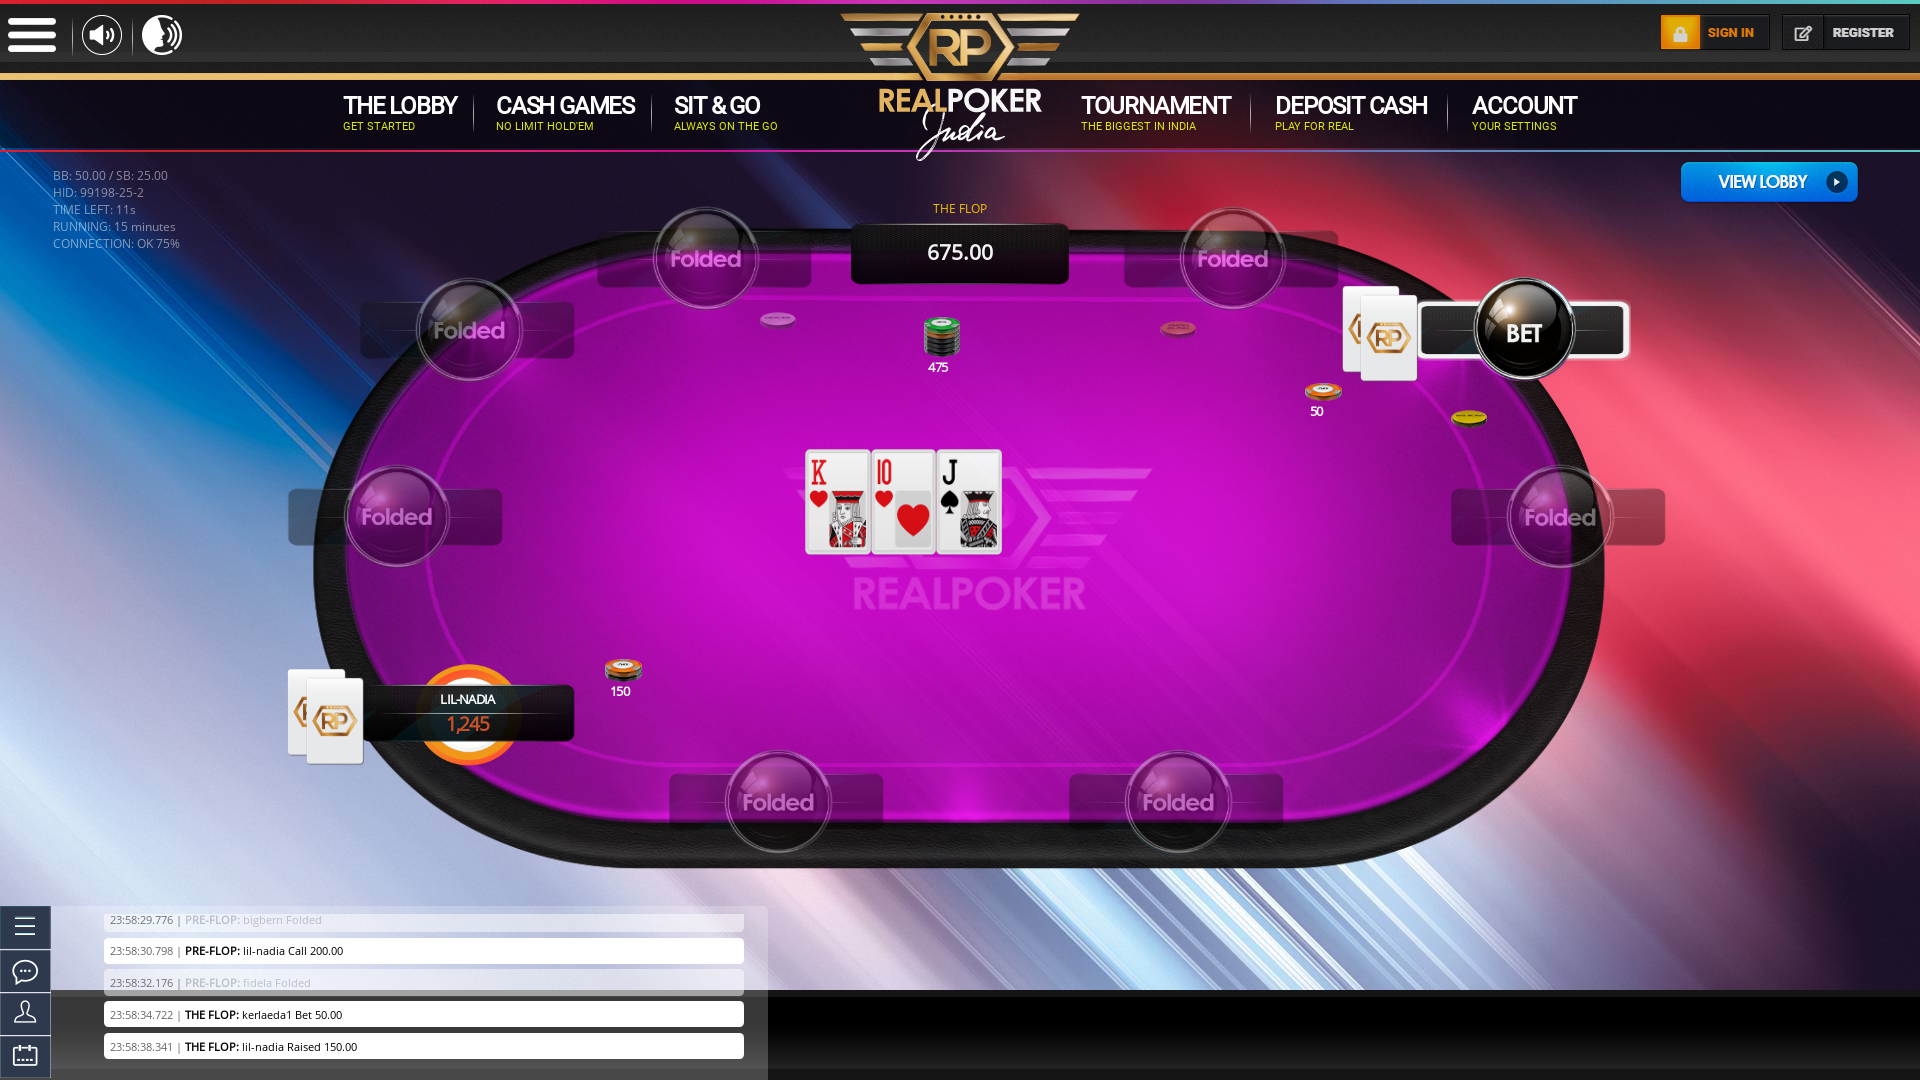 Indian poker on a 10 player table in the 15th minute